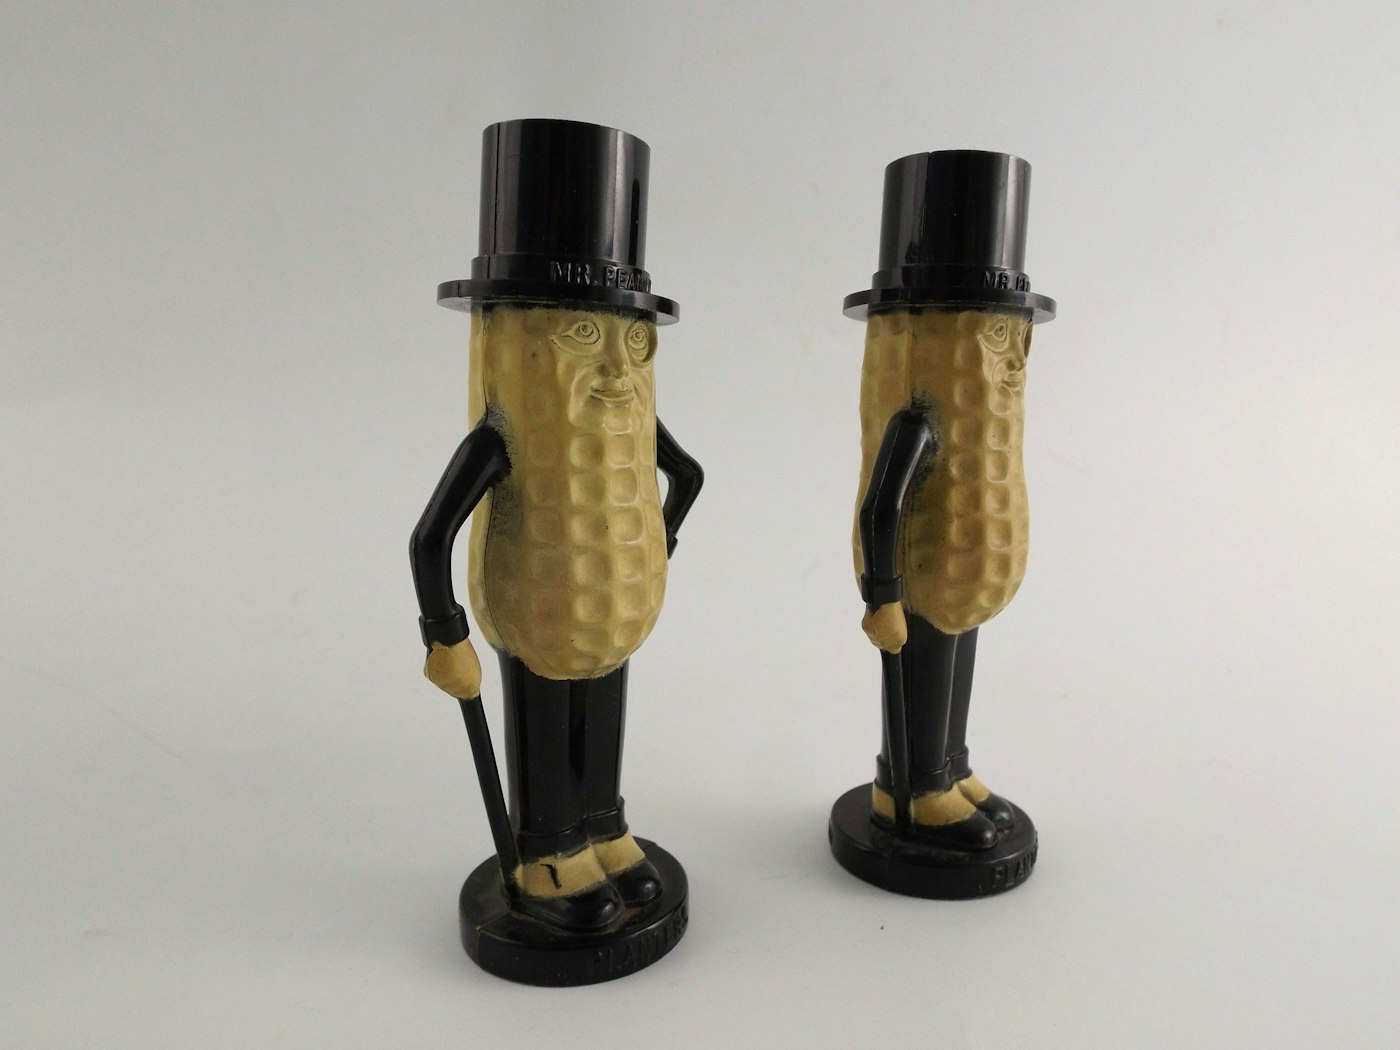 A Pair of Pyro Planters Mr. Peanut Salt and Pepper Shakers | EBTH1400 x 1050